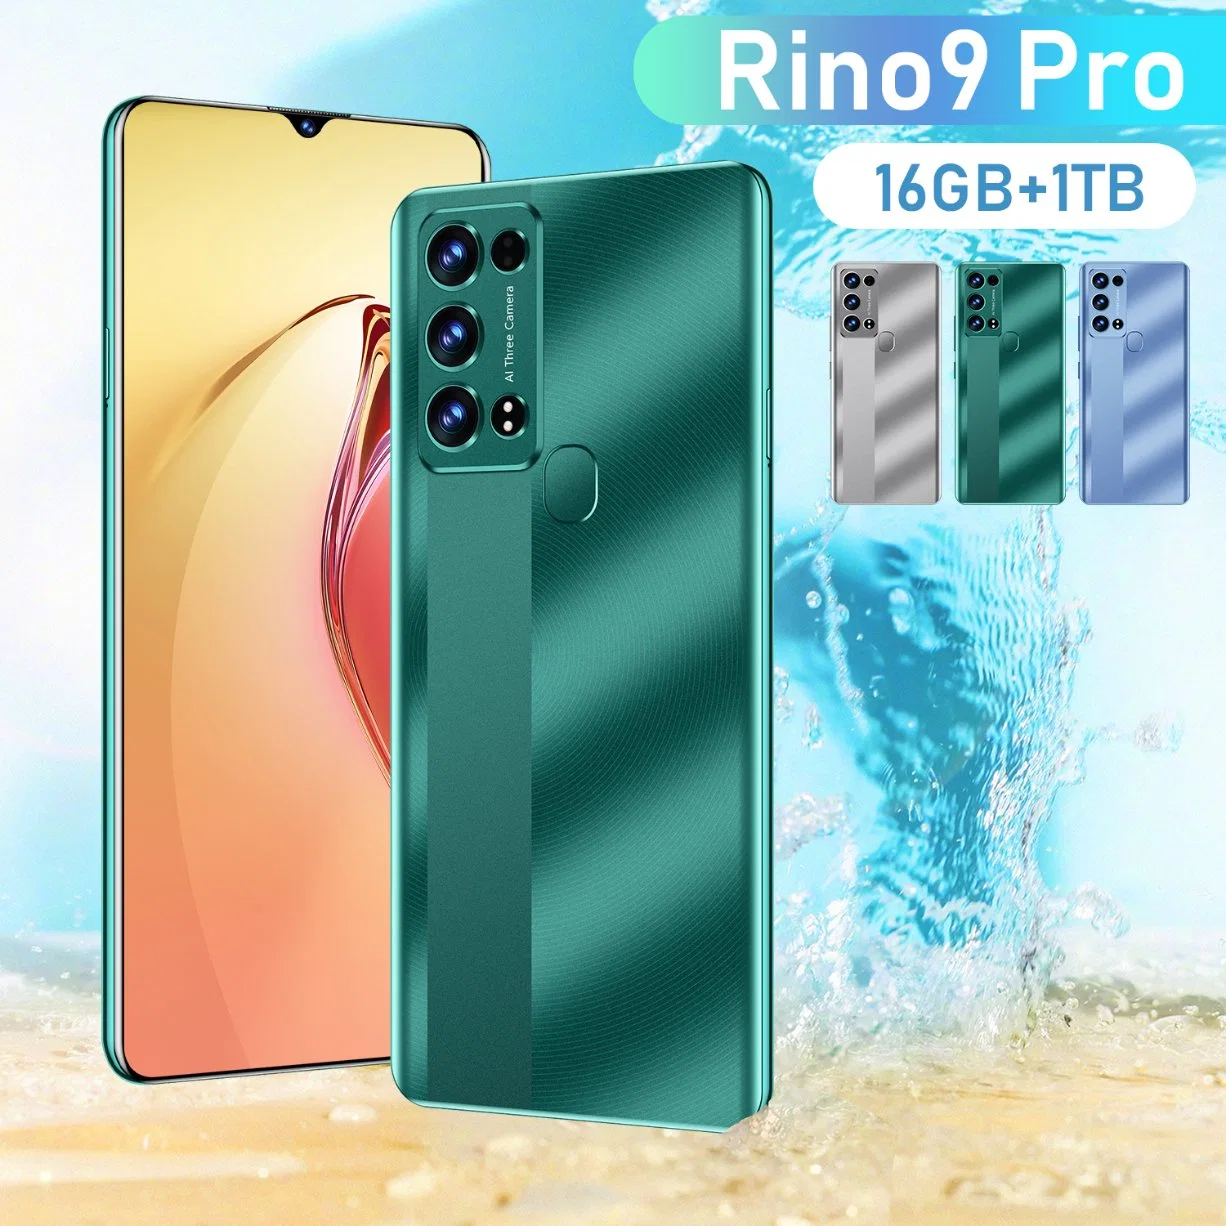 Wholesale/Supplier Original Brand New Smart Mobile Phone Model Rino9 PRO 5g Smartphone 3GB+64GB 1tb 7.2", Android Smart Phone, OEM/ODM Ready in Stock